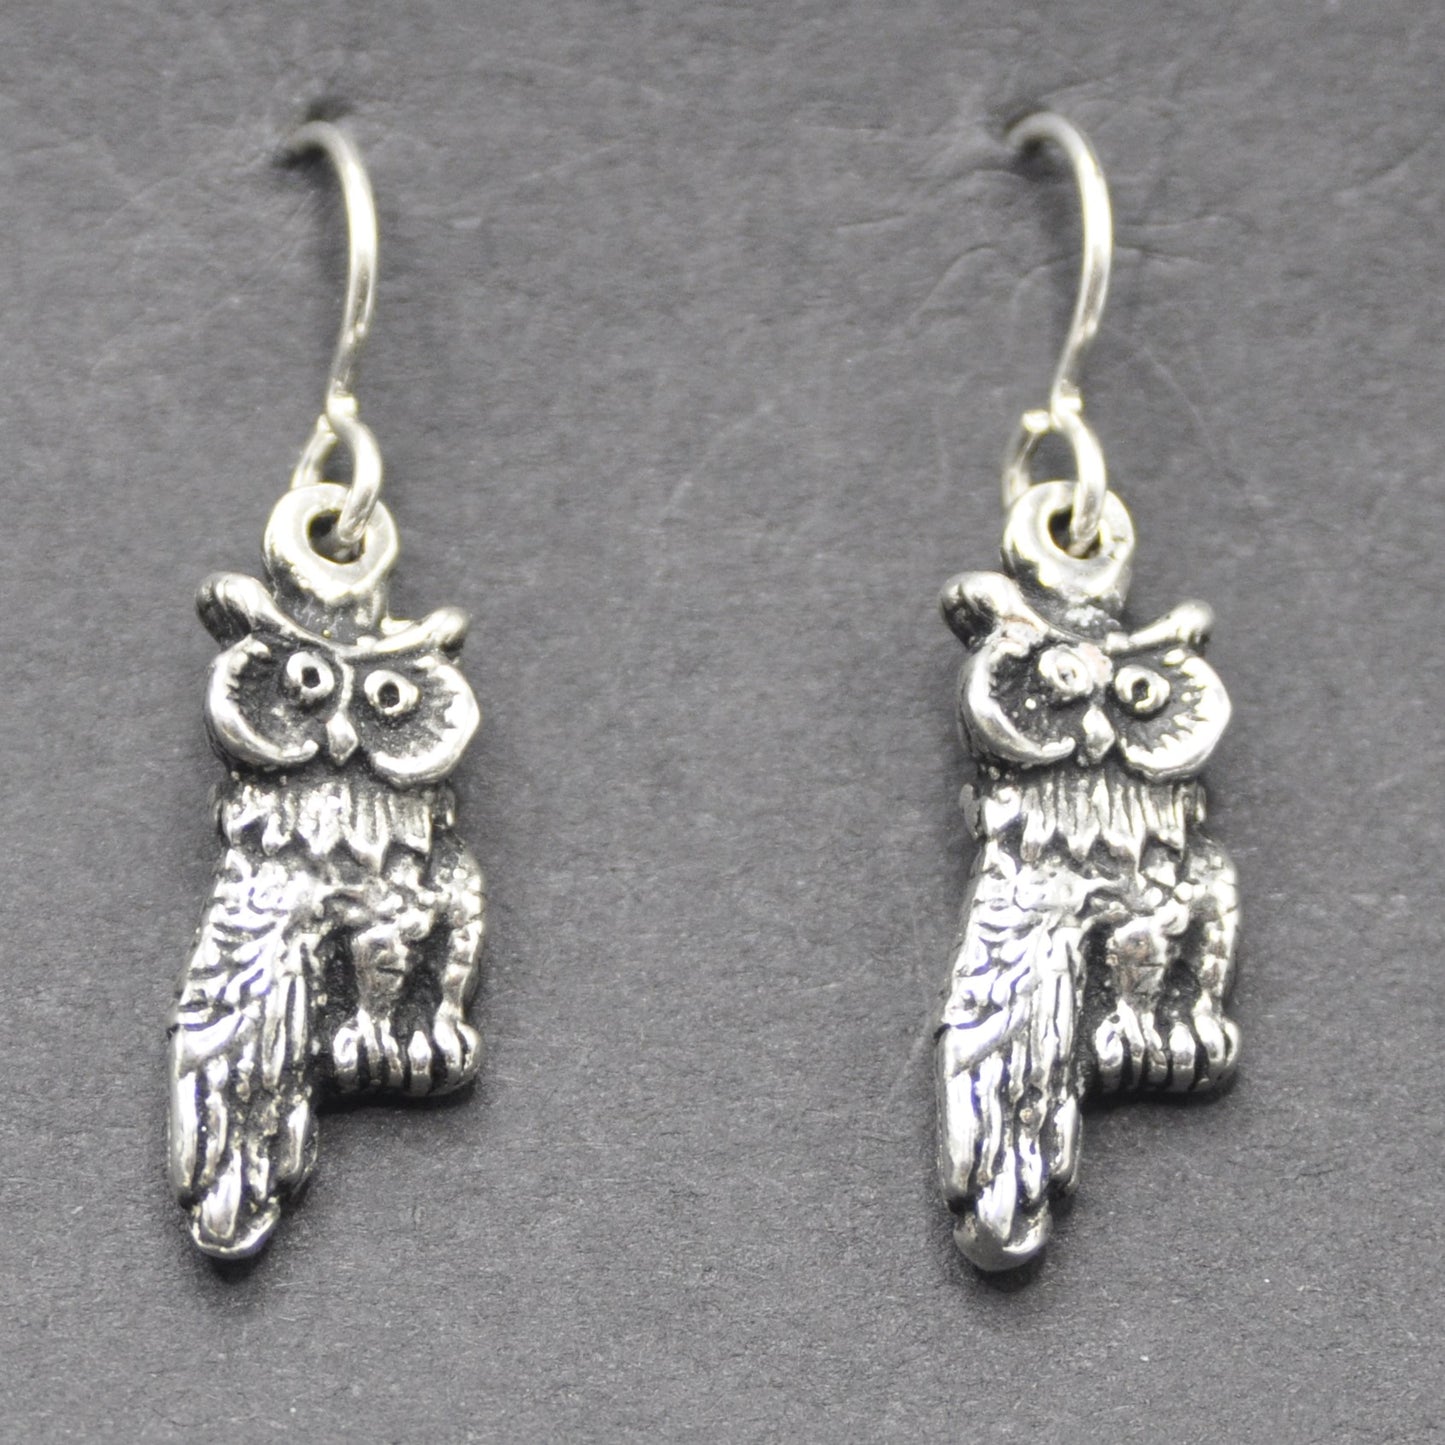 Owl Earrings, Handcrafted Recycled Silver Jewelry Endangered Species .925